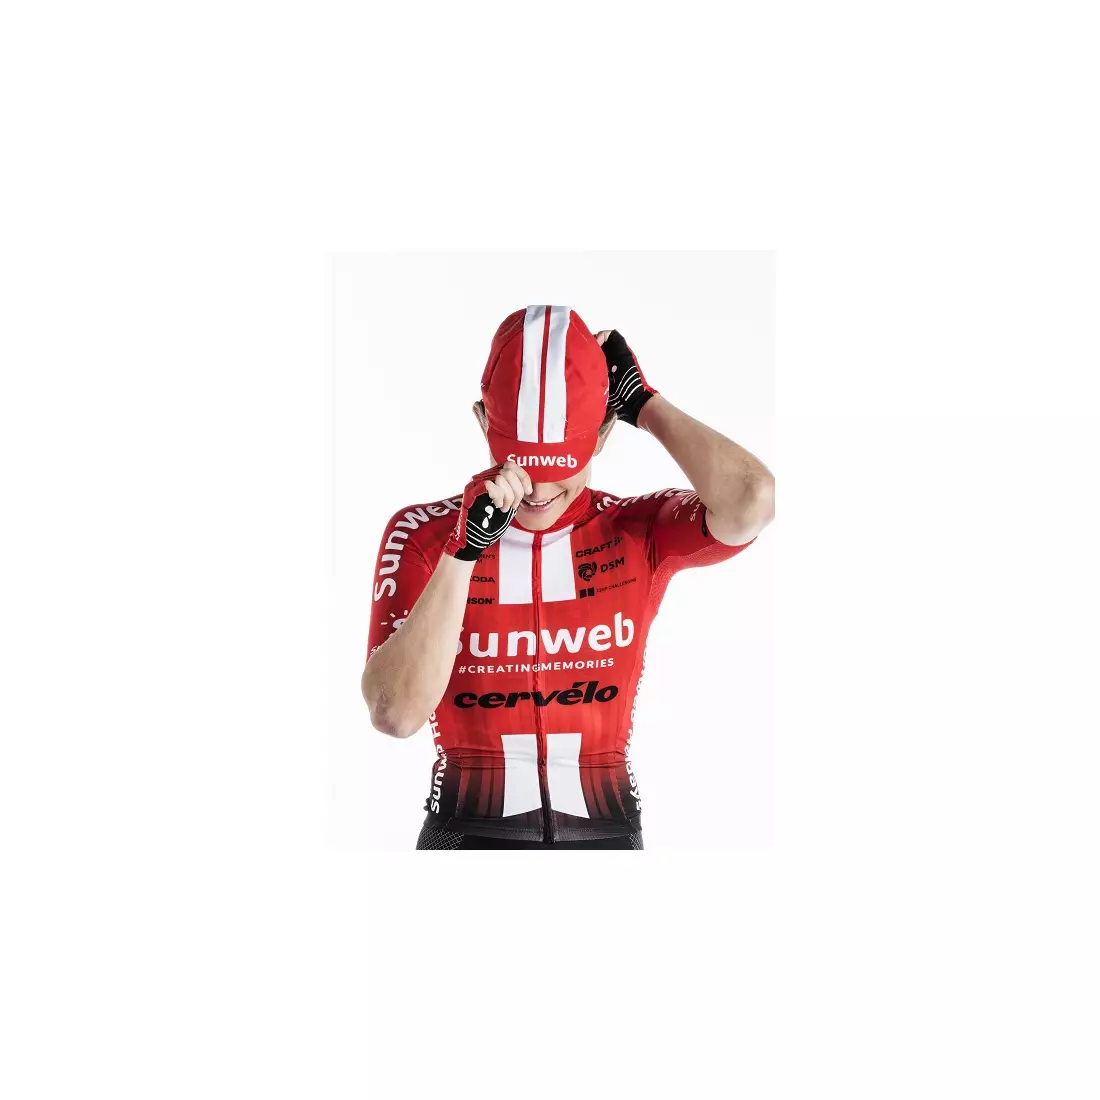 CRAFT cycling cap in team colors SUNWEB 2019 1908213-999900-ONE SIZE